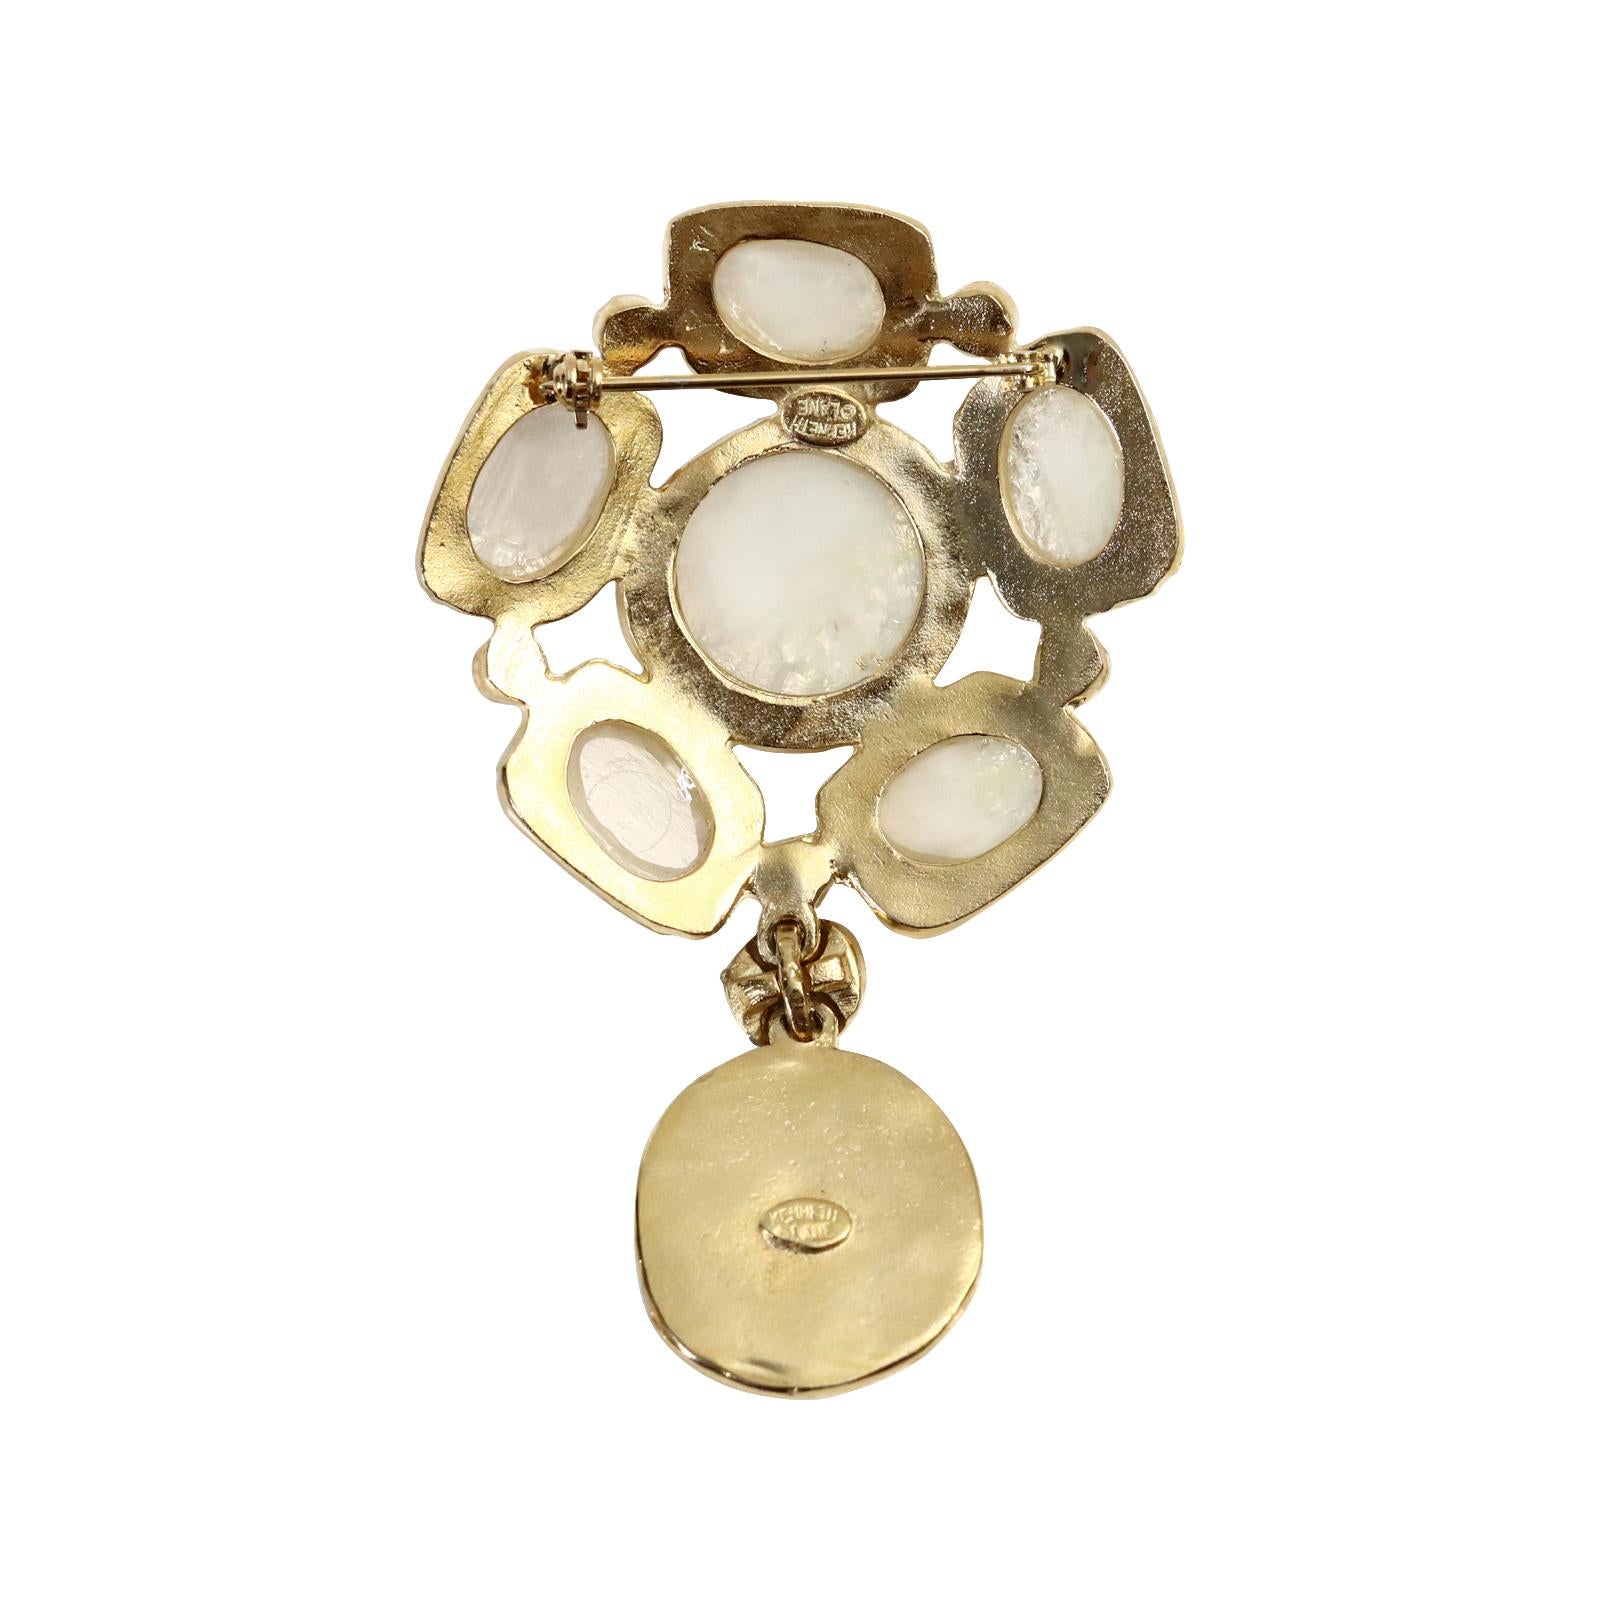 Modern Collectible KJL Hamered Gold with Opal Cabochon Drop Brooch, circa 2000s For Sale